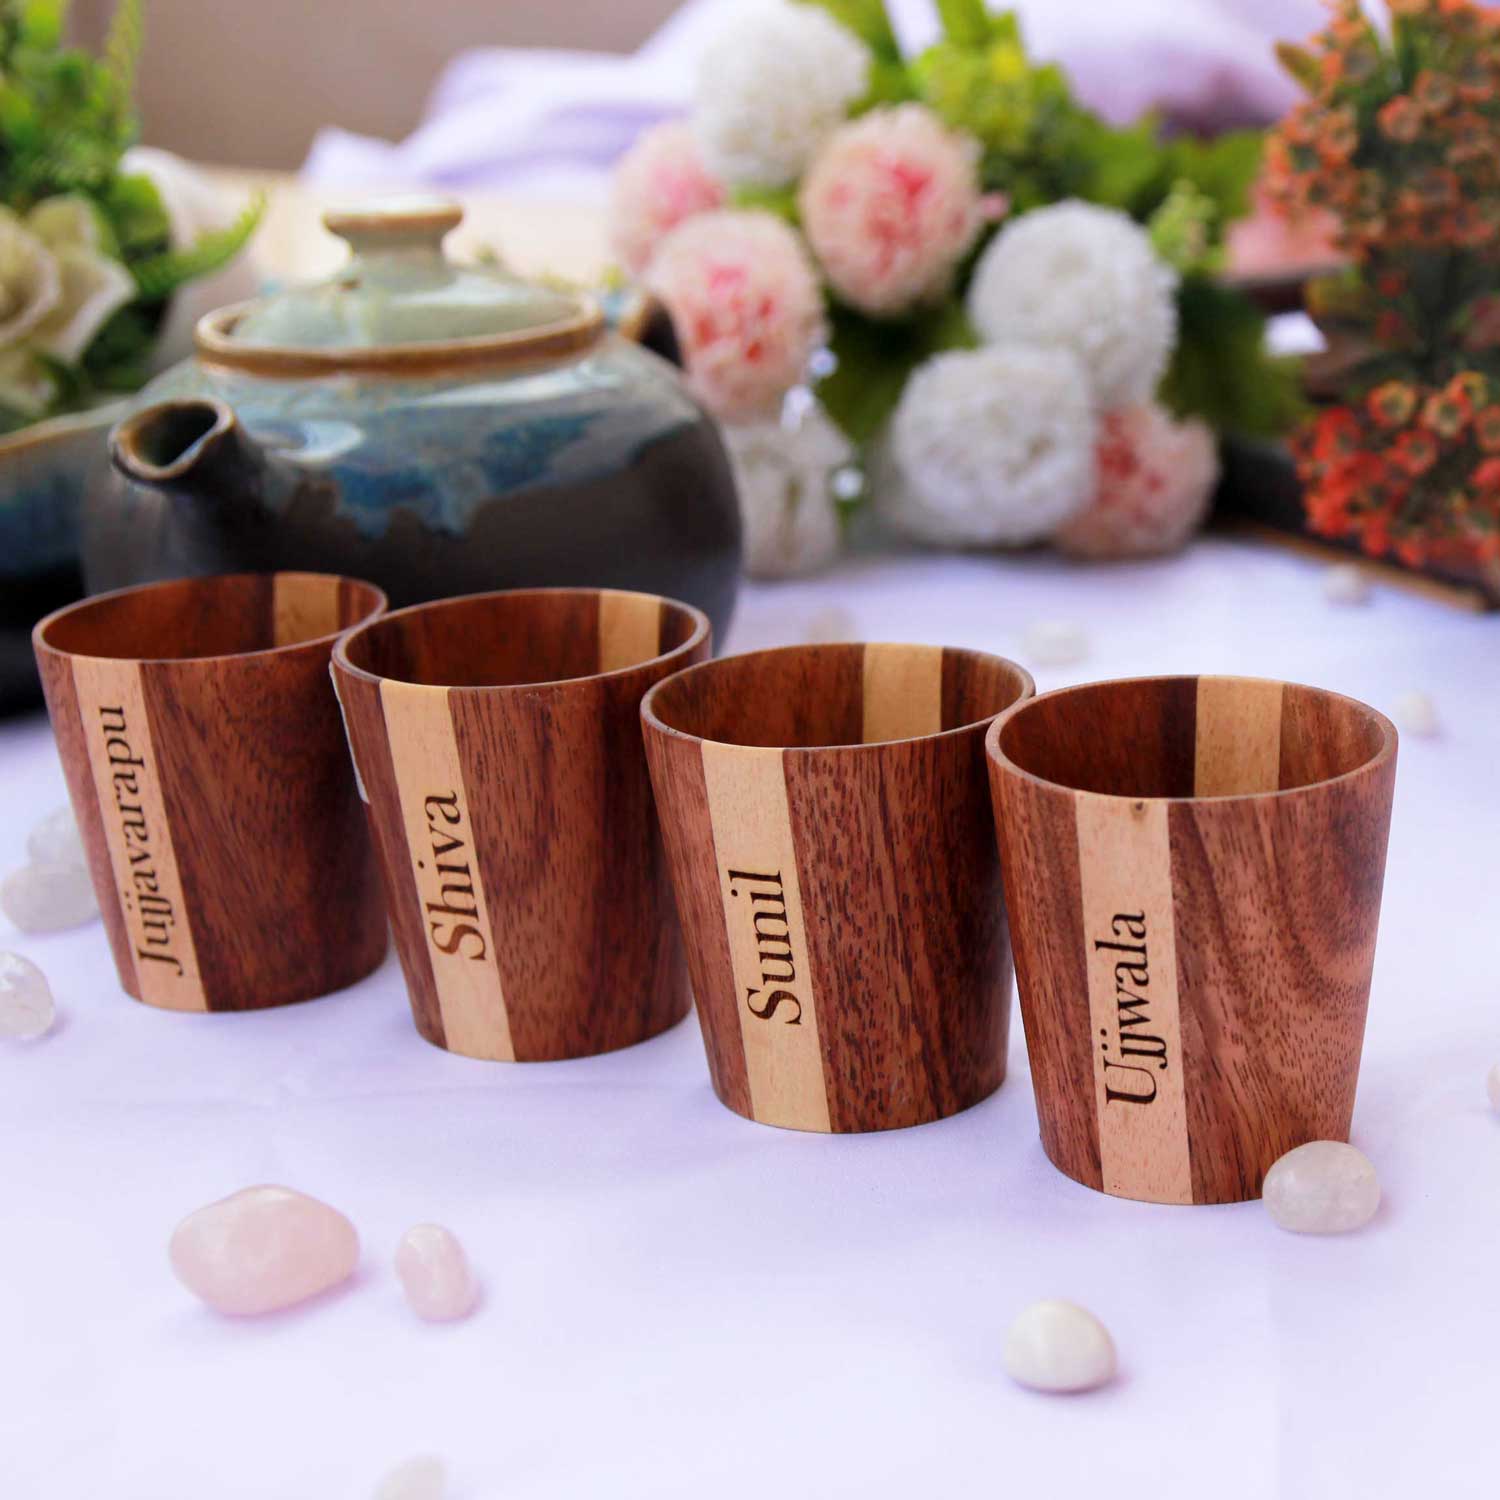 https://cdn.shopify.com/s/files/1/0941/2500/products/personalized-wooden-tea-glasses-set-of-4-engraved-with-name-gift-for-housewarming-square-1500px_1600x.jpg?v=1659369465